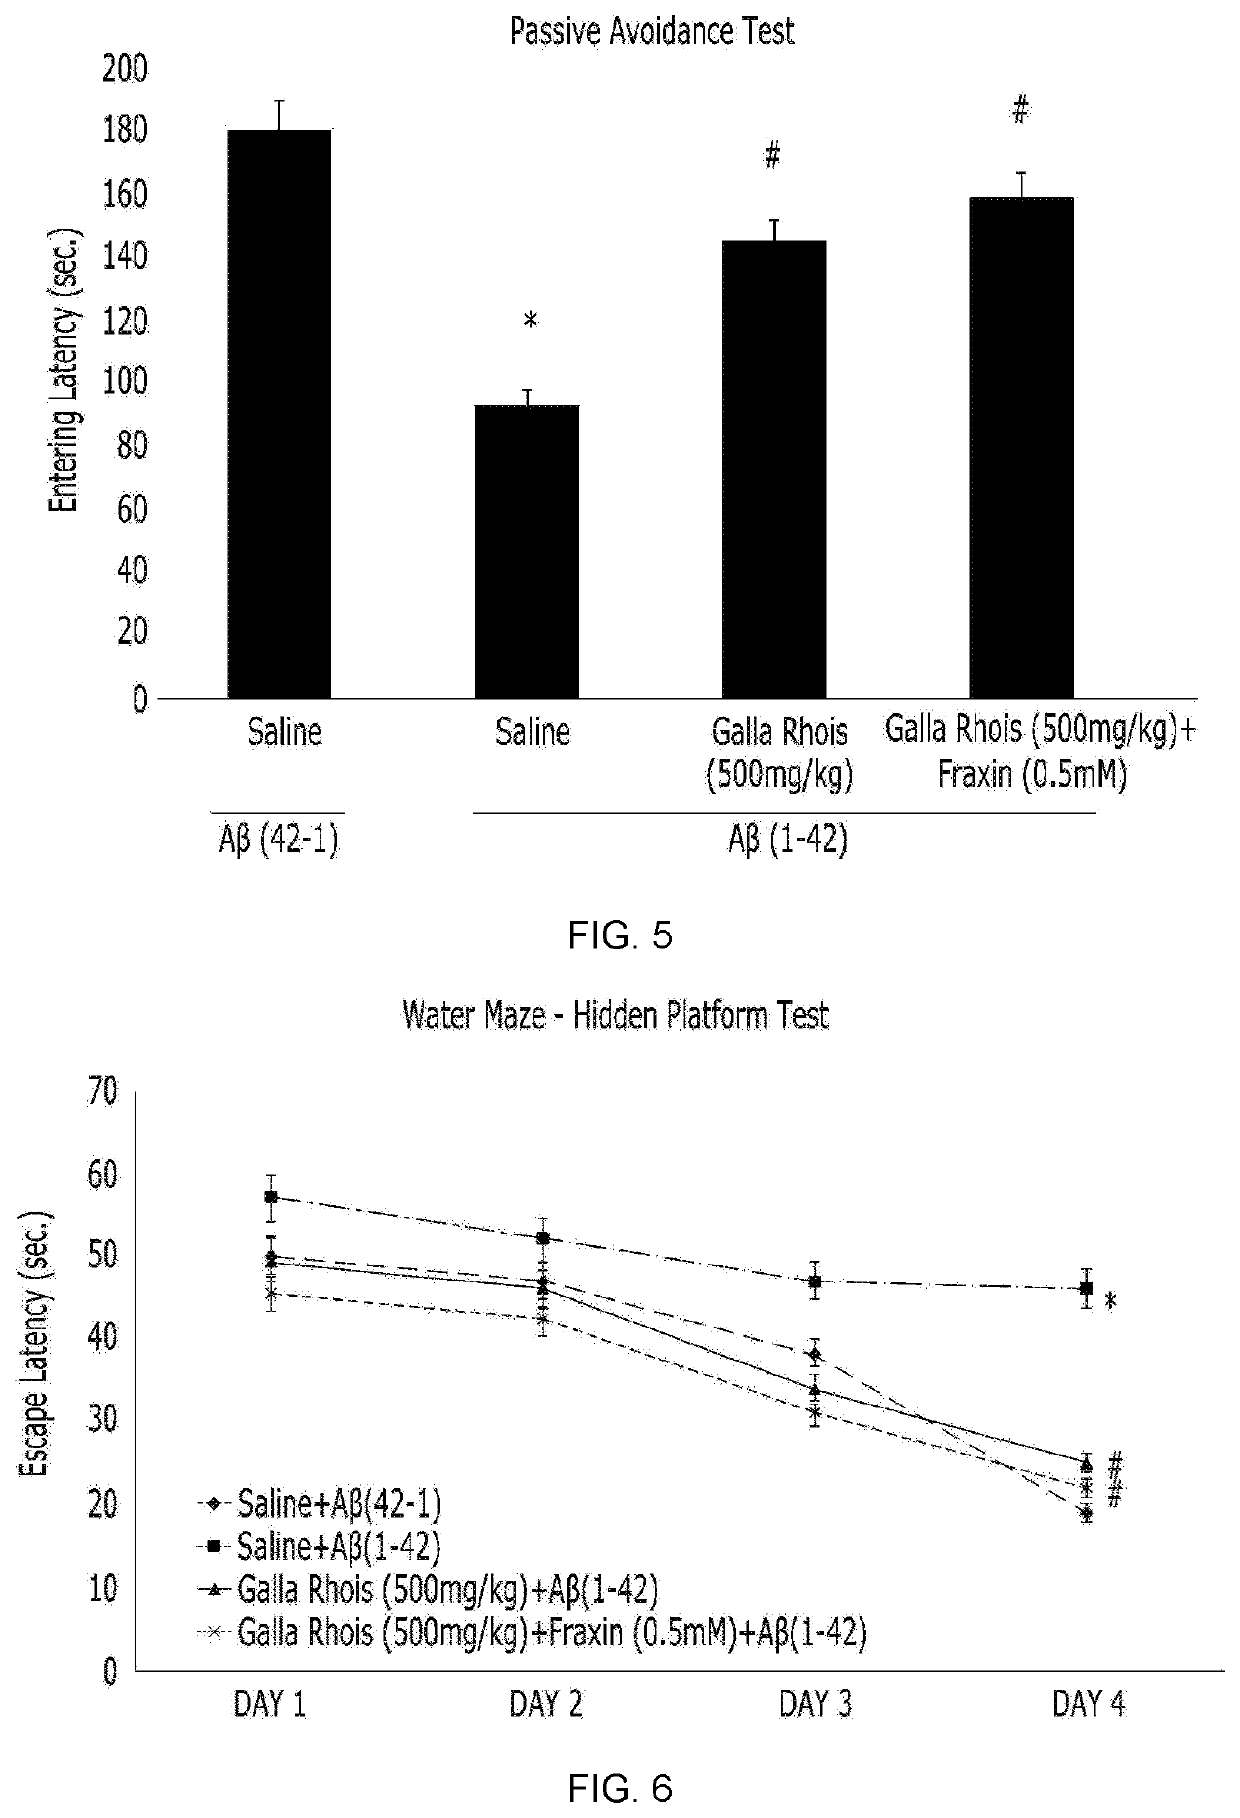 Composition for improving cognitive ability and preventing or treating dementia and attention deficit hyperactivity disorder, comprising galla rhois extract and fraxin as active ingredients